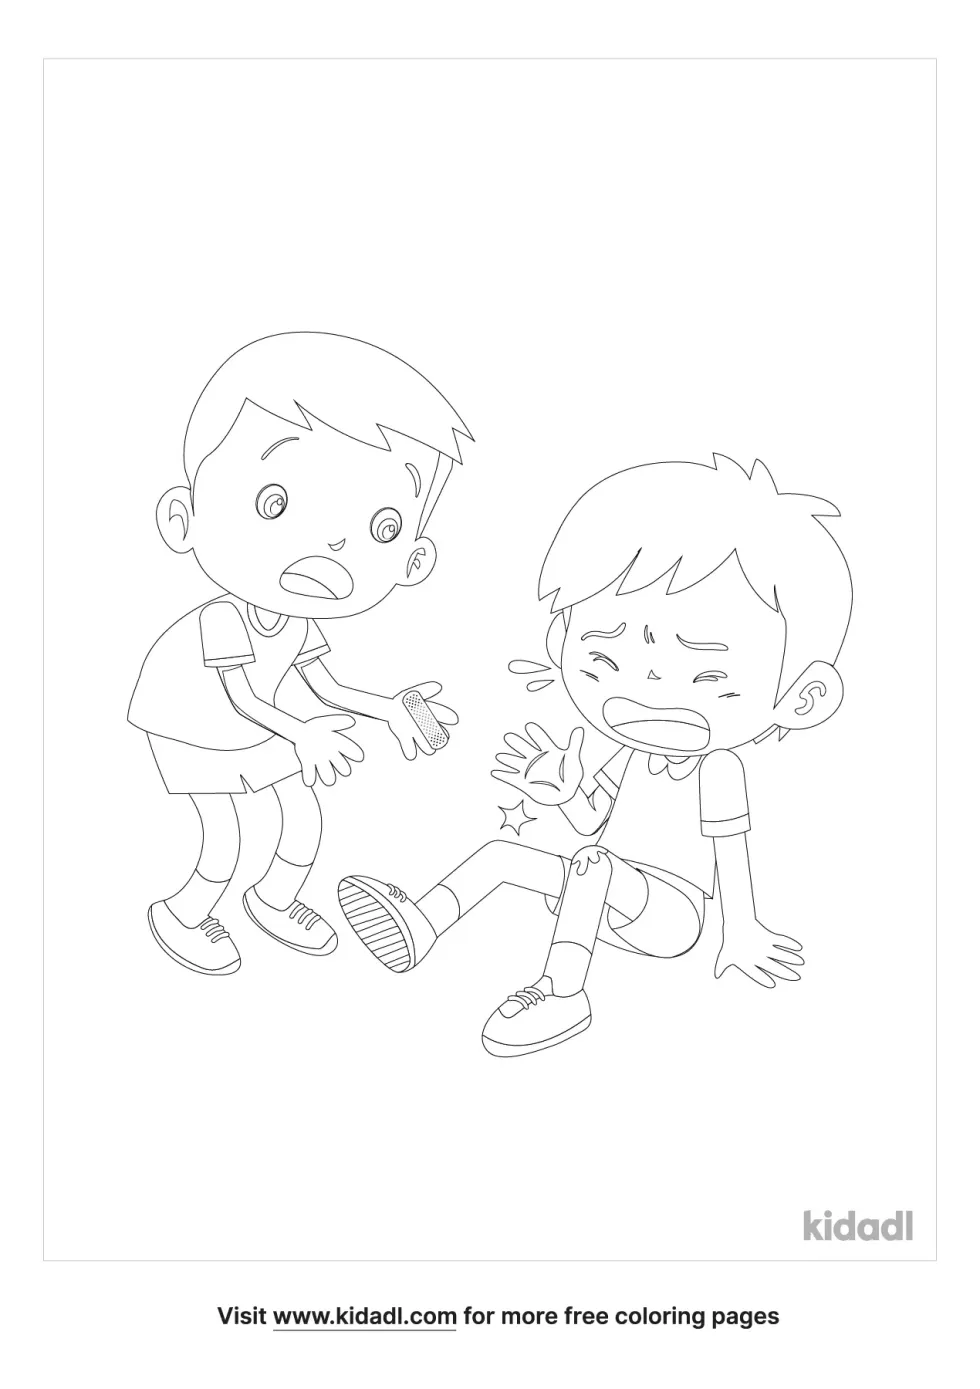 Bandaid On A Scraped Knee Coloring Page